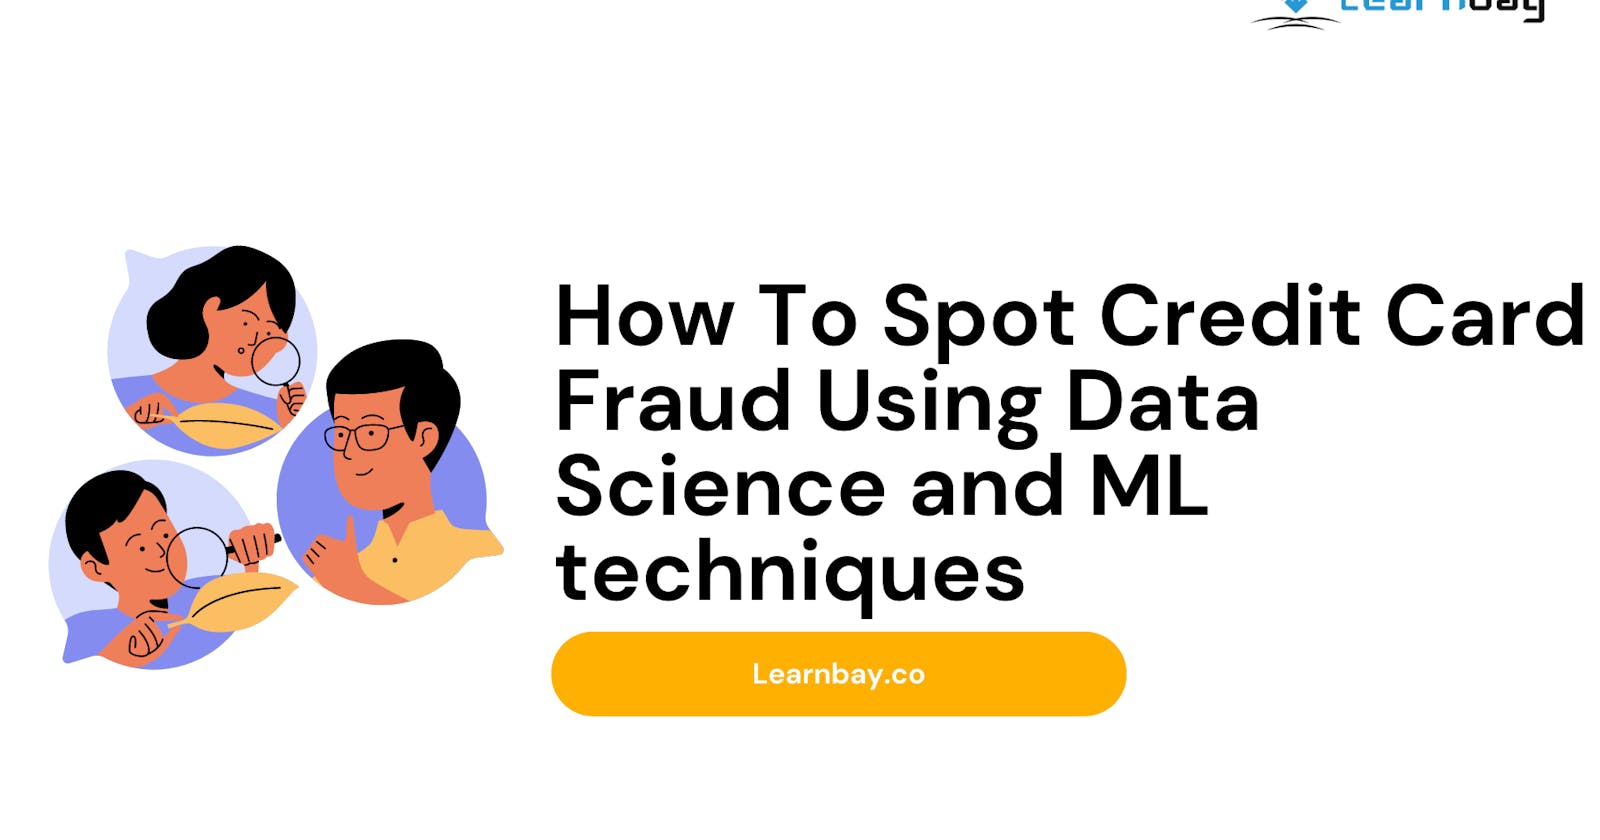 How To Spot Credit Card Fraud Using Data Science and ML techniques